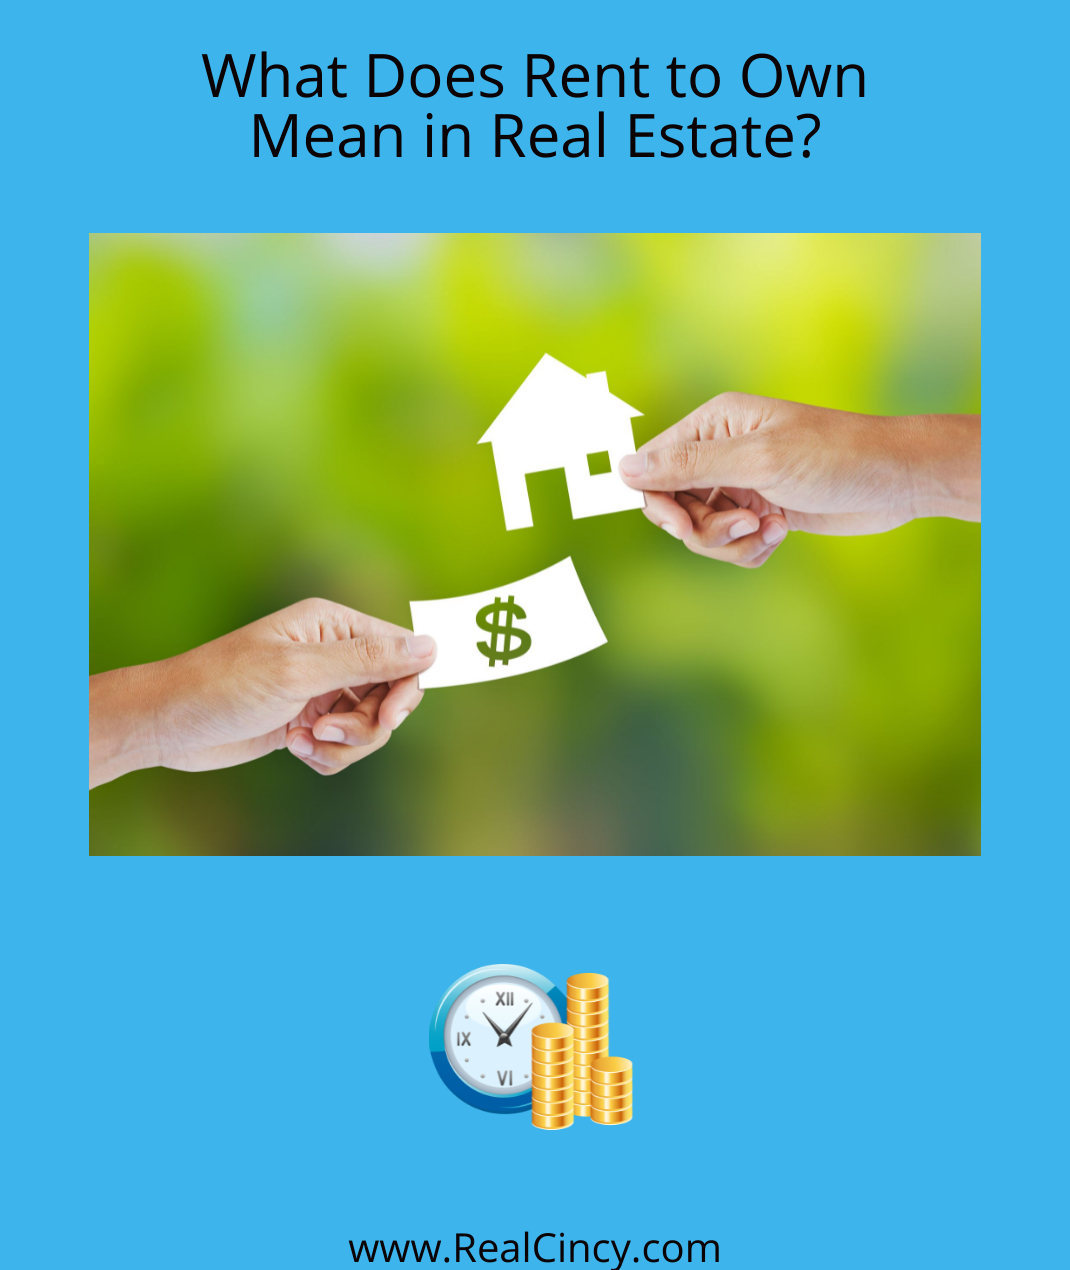 What Does Rent to Own Mean in Real Estate?